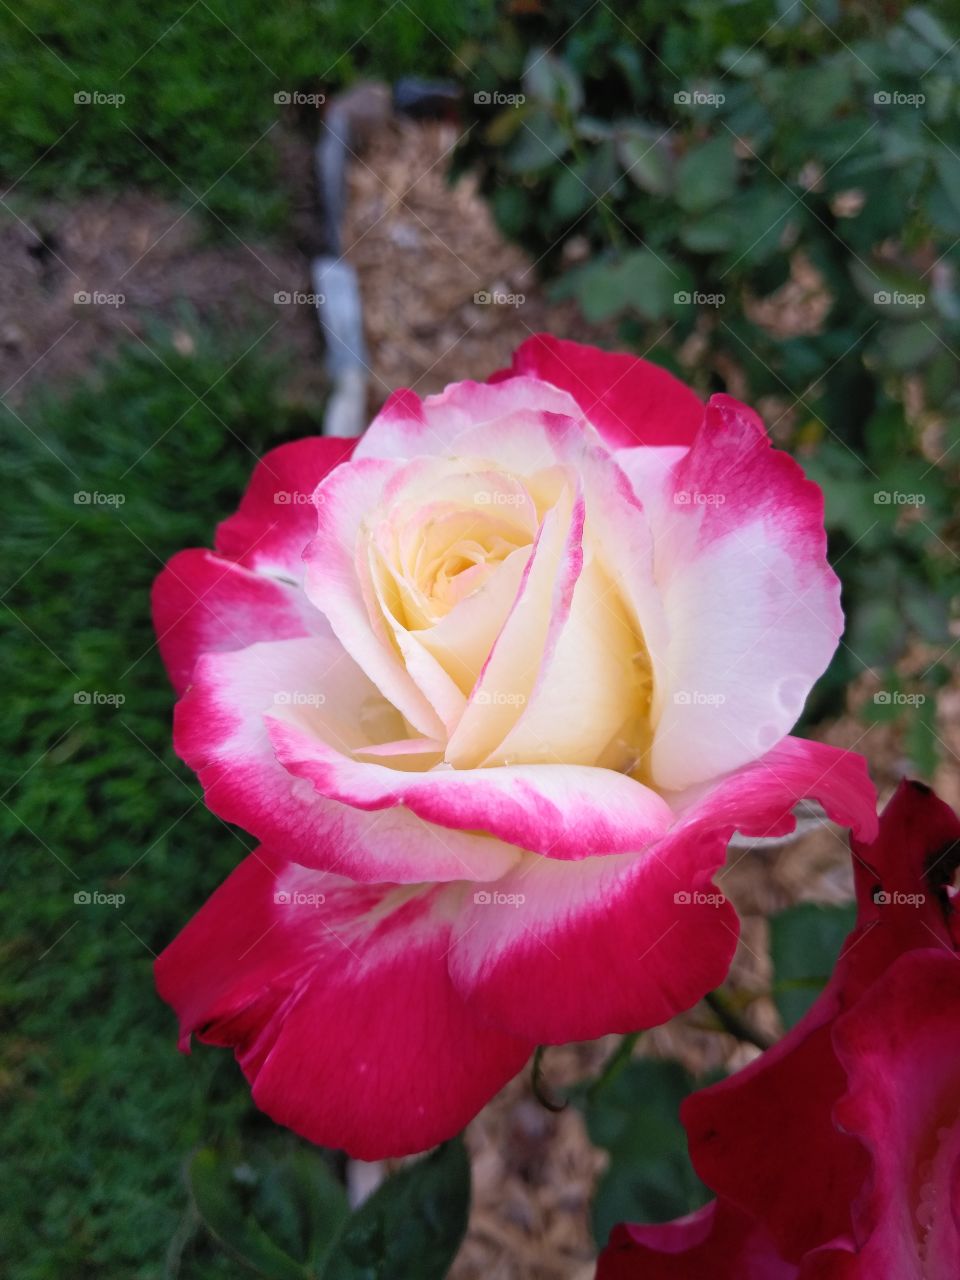 Double delight rose blooming